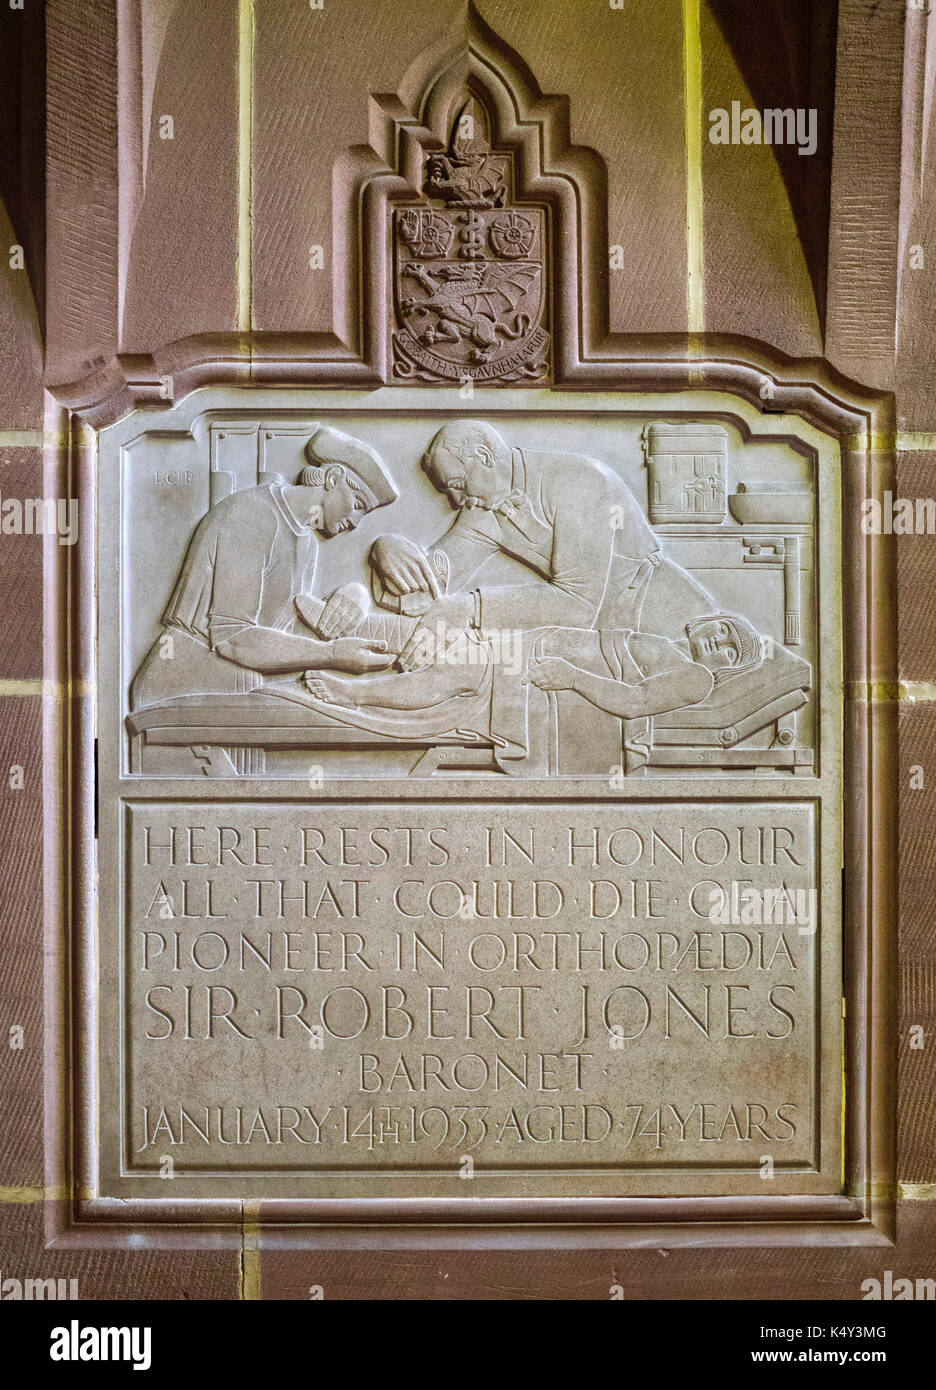 Memorial to Sir Robert Jones (1857-1933), orthopaedic pioneer, in Anglican Cathedral, Liverpool. Stock Photo